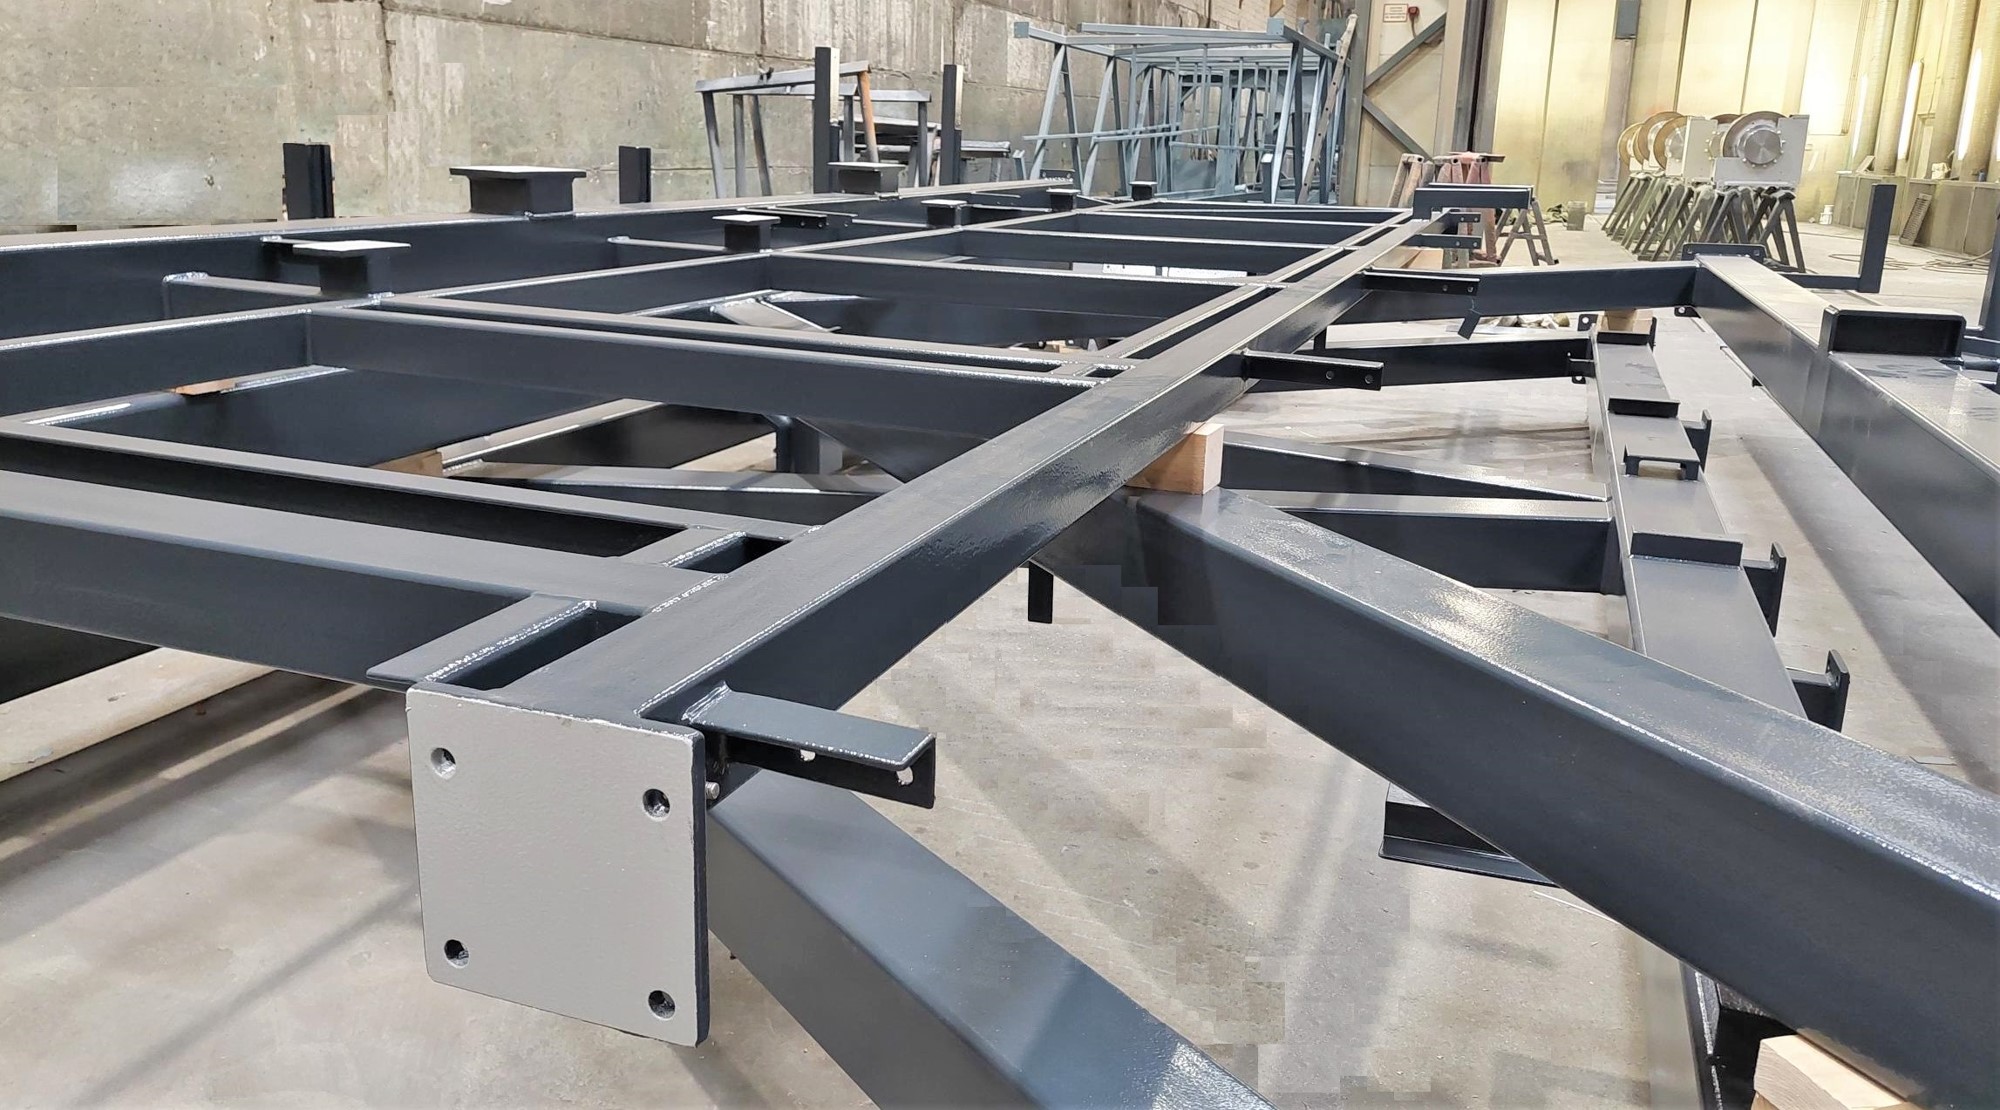 ROXON's material handling equipment is painted with coatings supplied by Nor-Maali